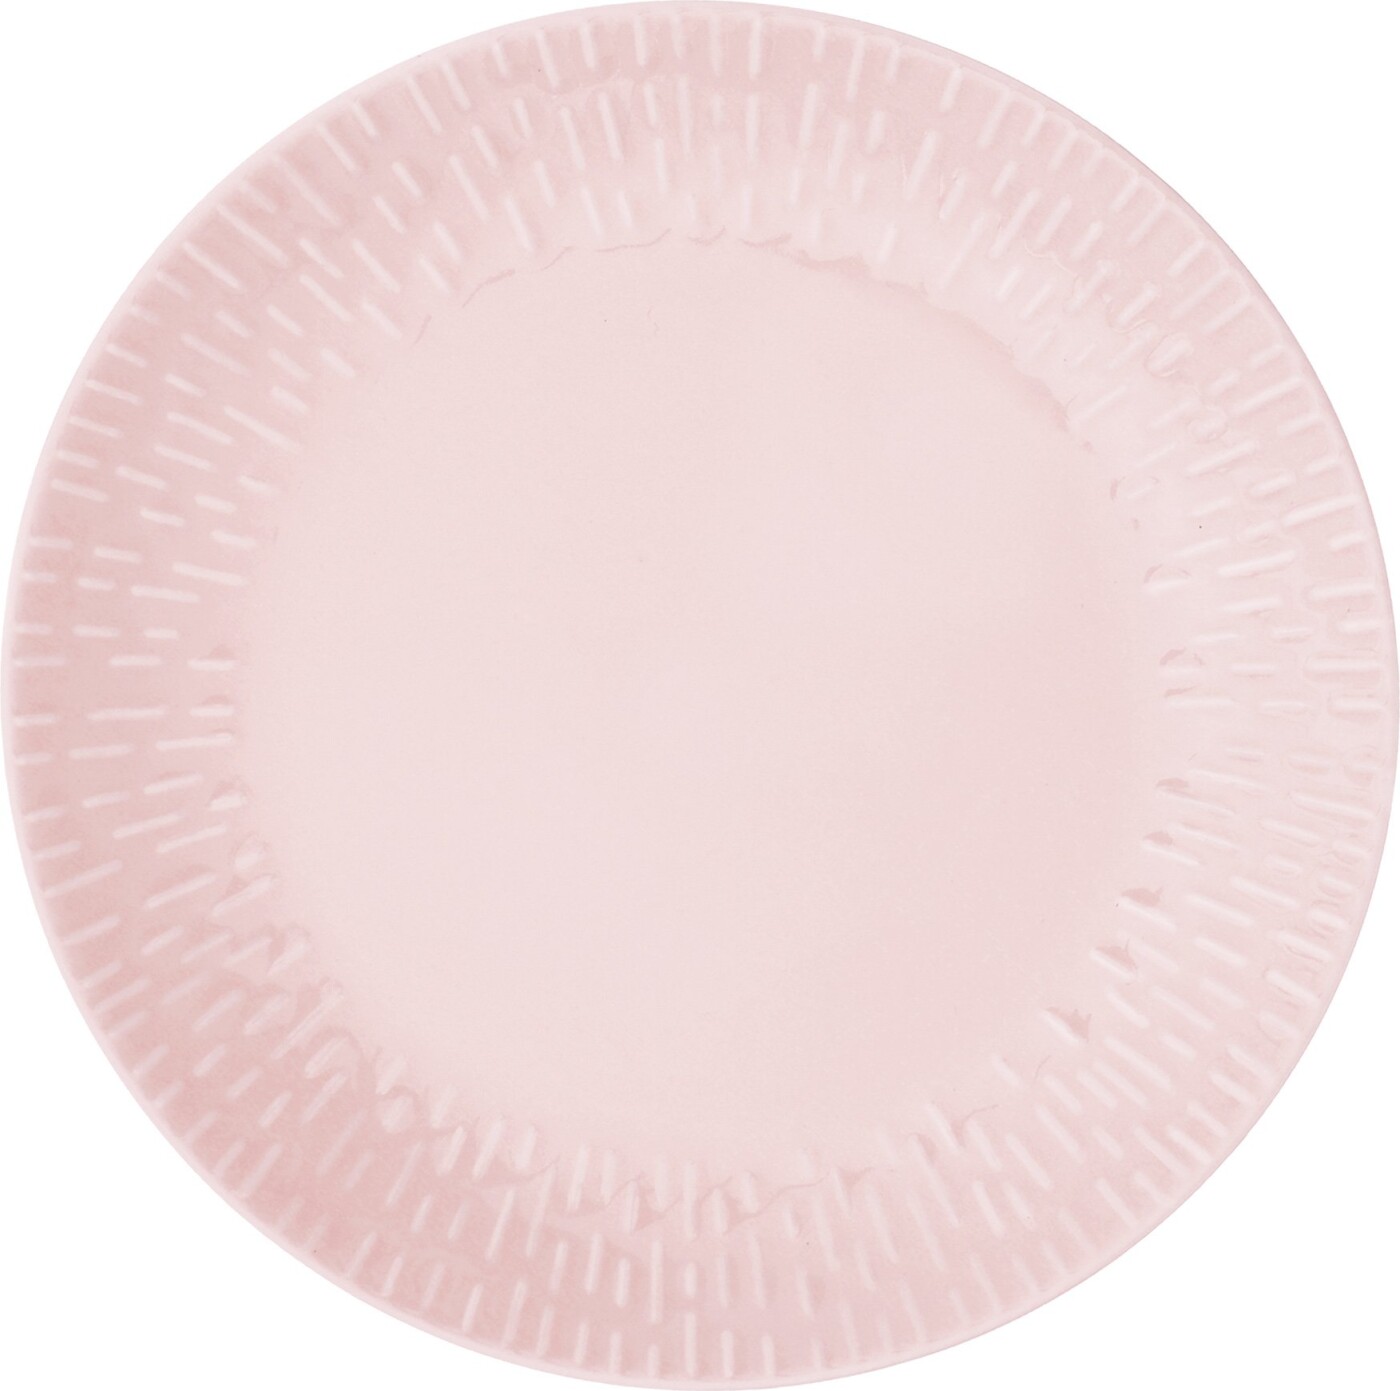 Billede af Aida - Life In Colour - Confetti - Candyfloss Frokost Tall. M/relief Porcelæn (13346)